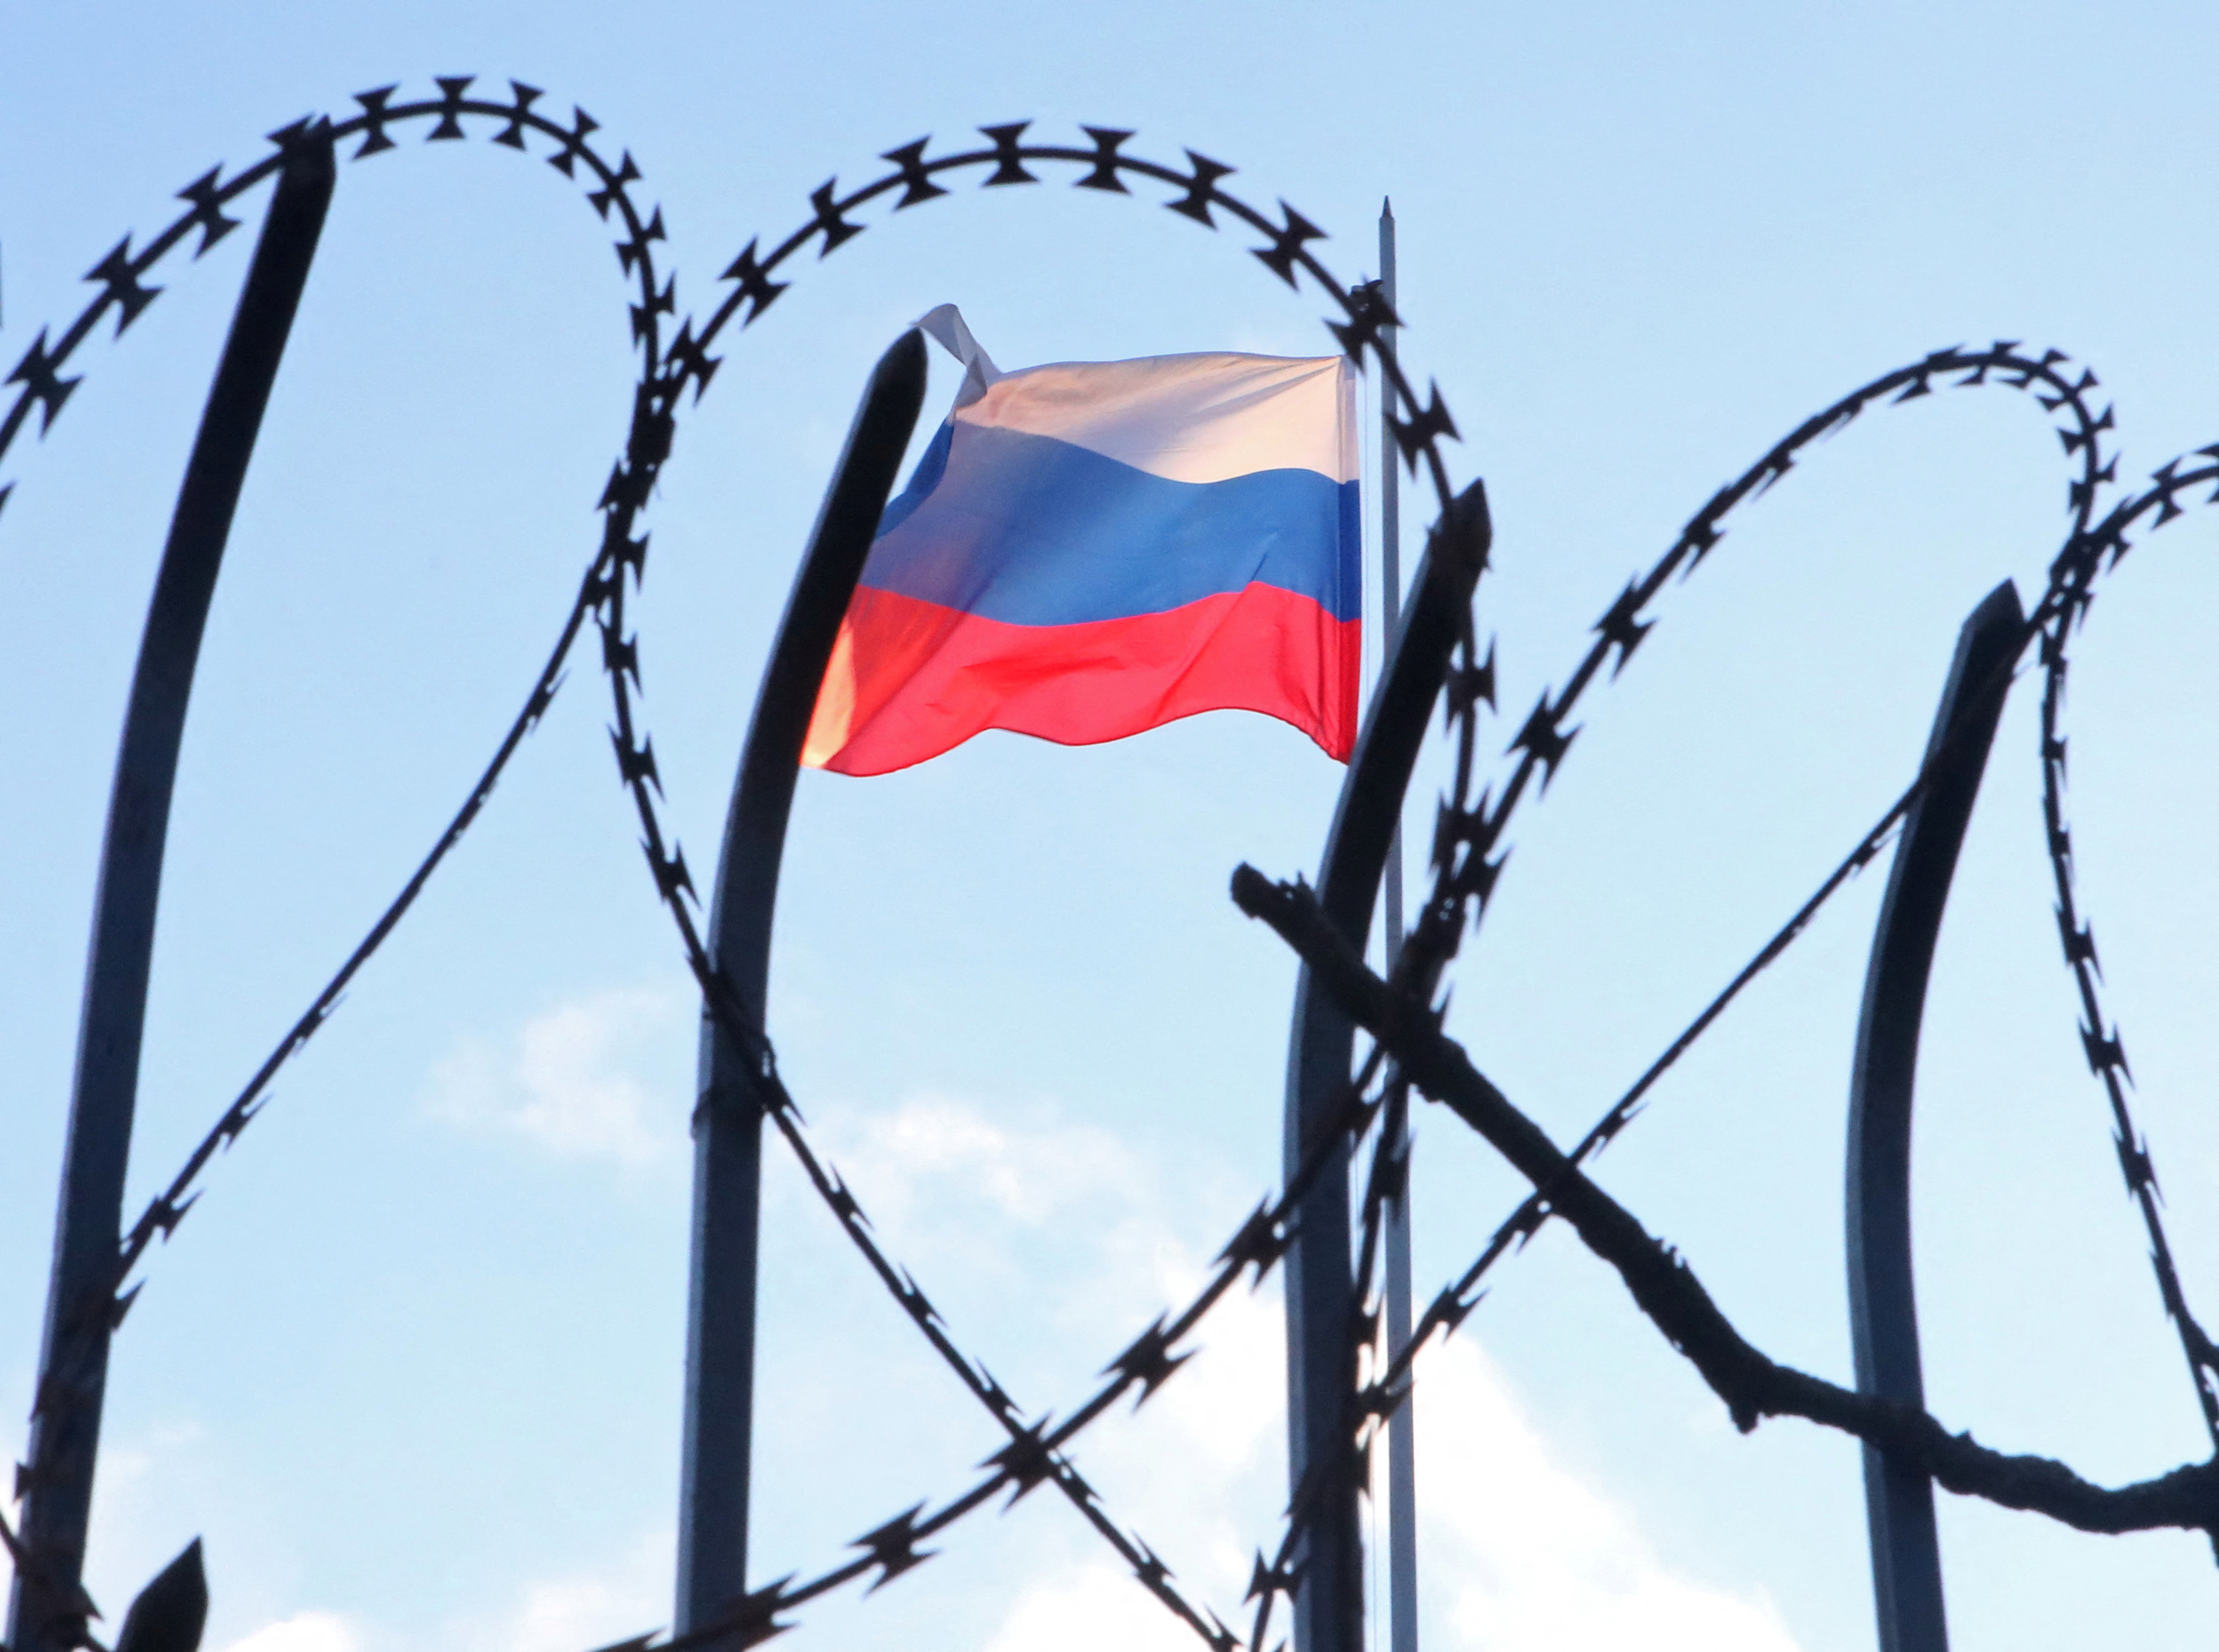 The Russian flag is seen behind a razor wire fence on the roof of the Russian Consulate General in Kharkiv